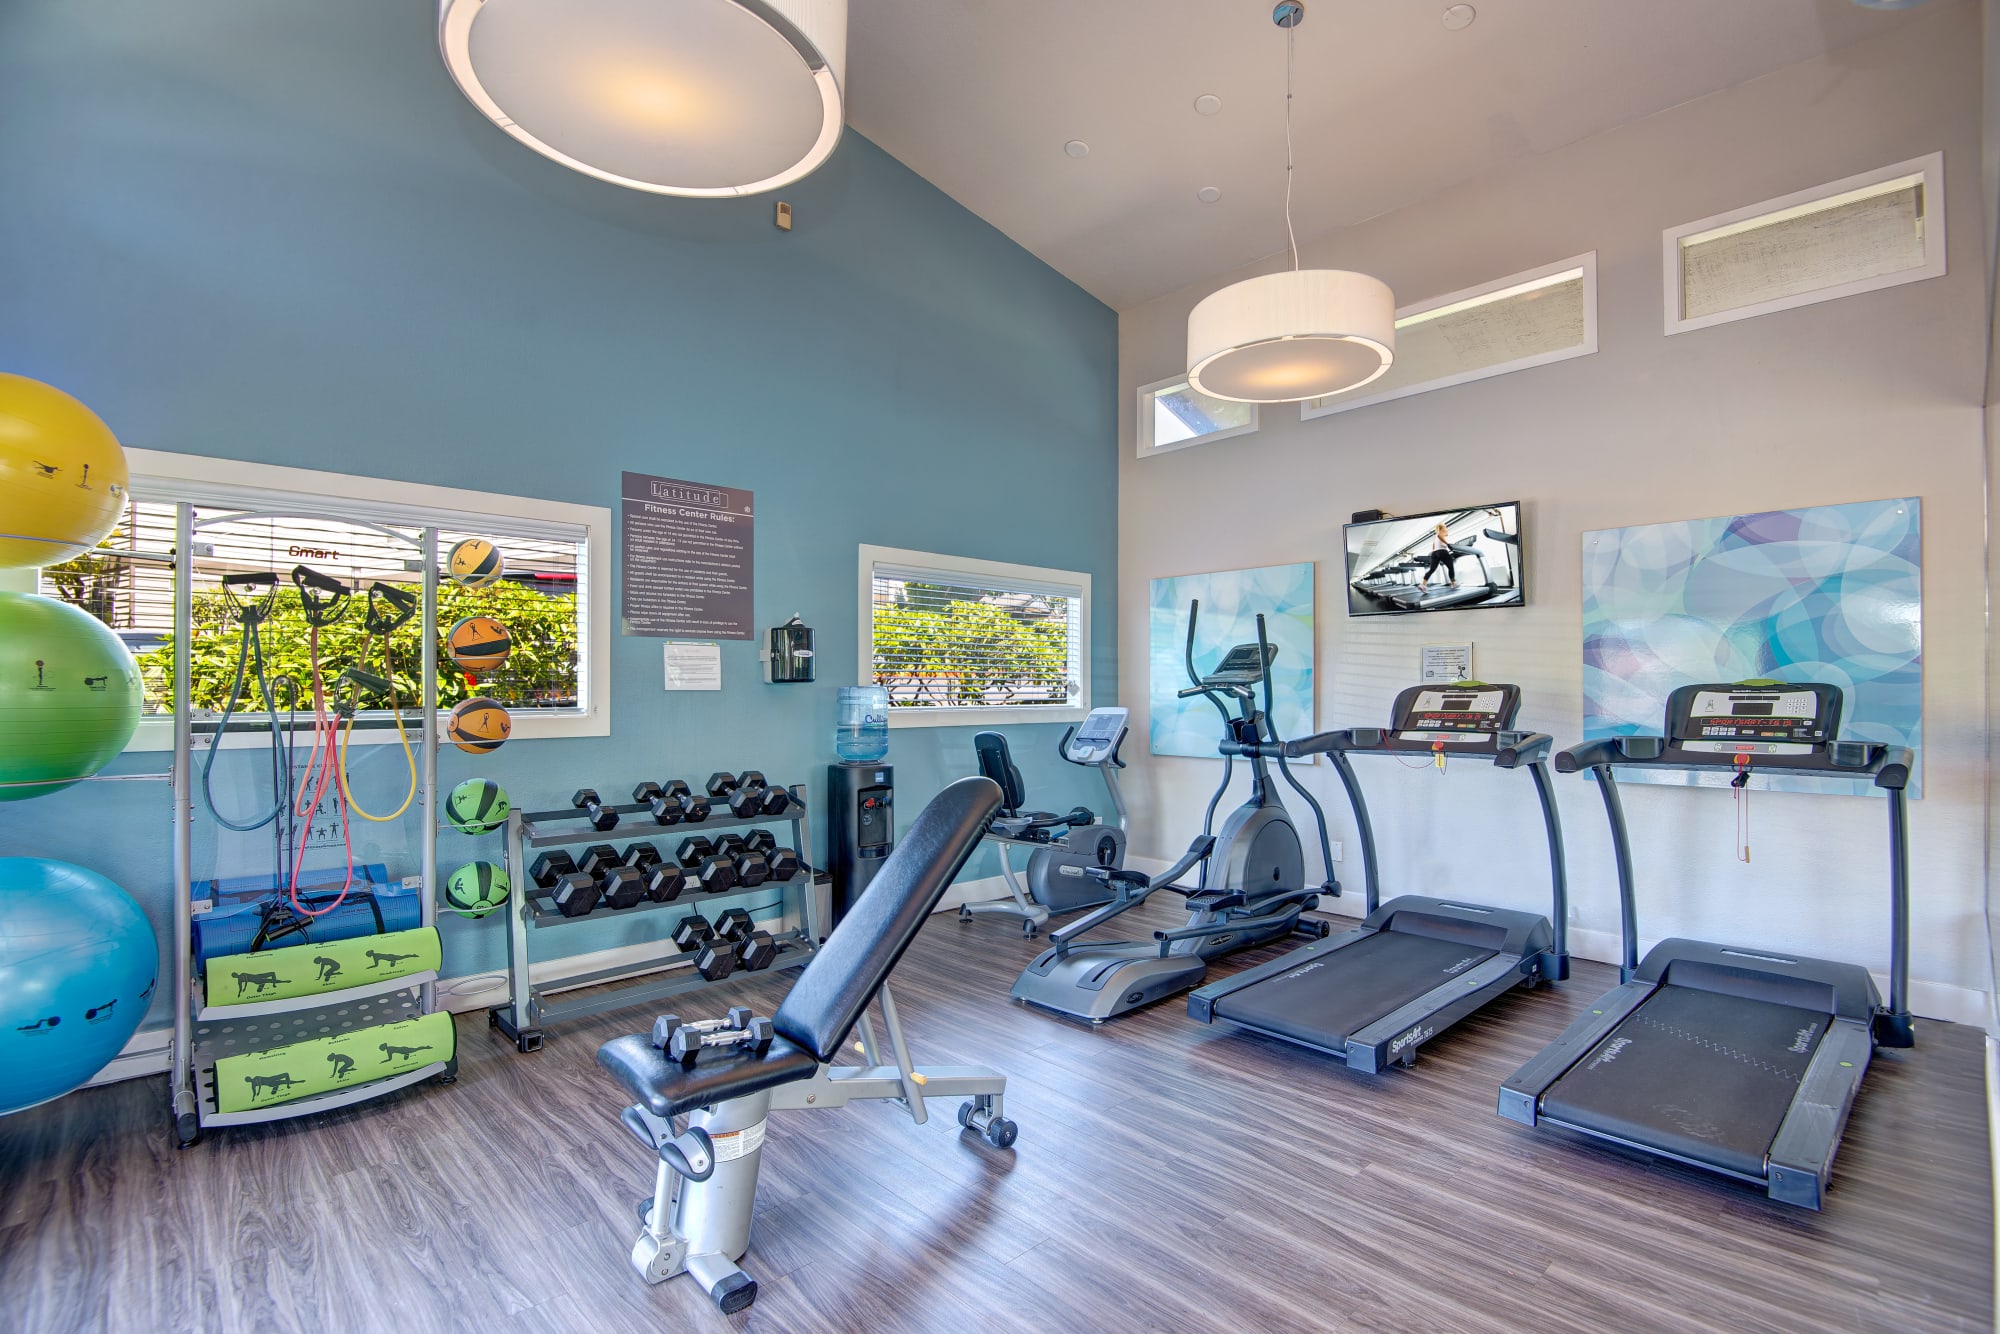 Fitness center with cardio machines and free weights at Latitude Apartments in Everett, Washington